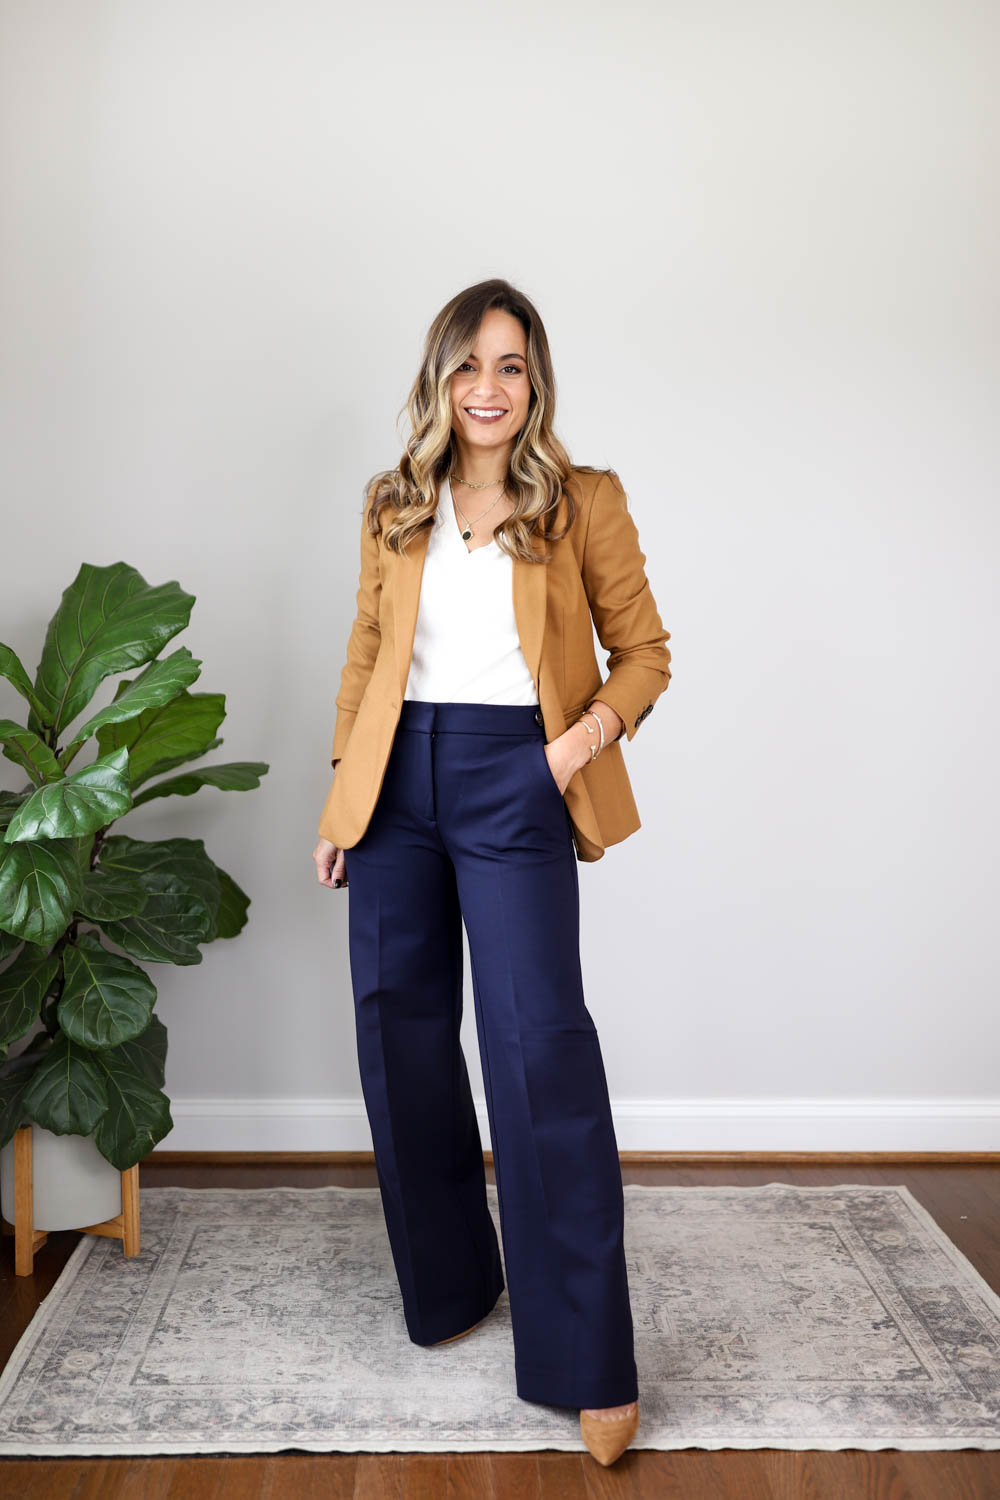 What's the Secret to Styling Wide Leg Pants?